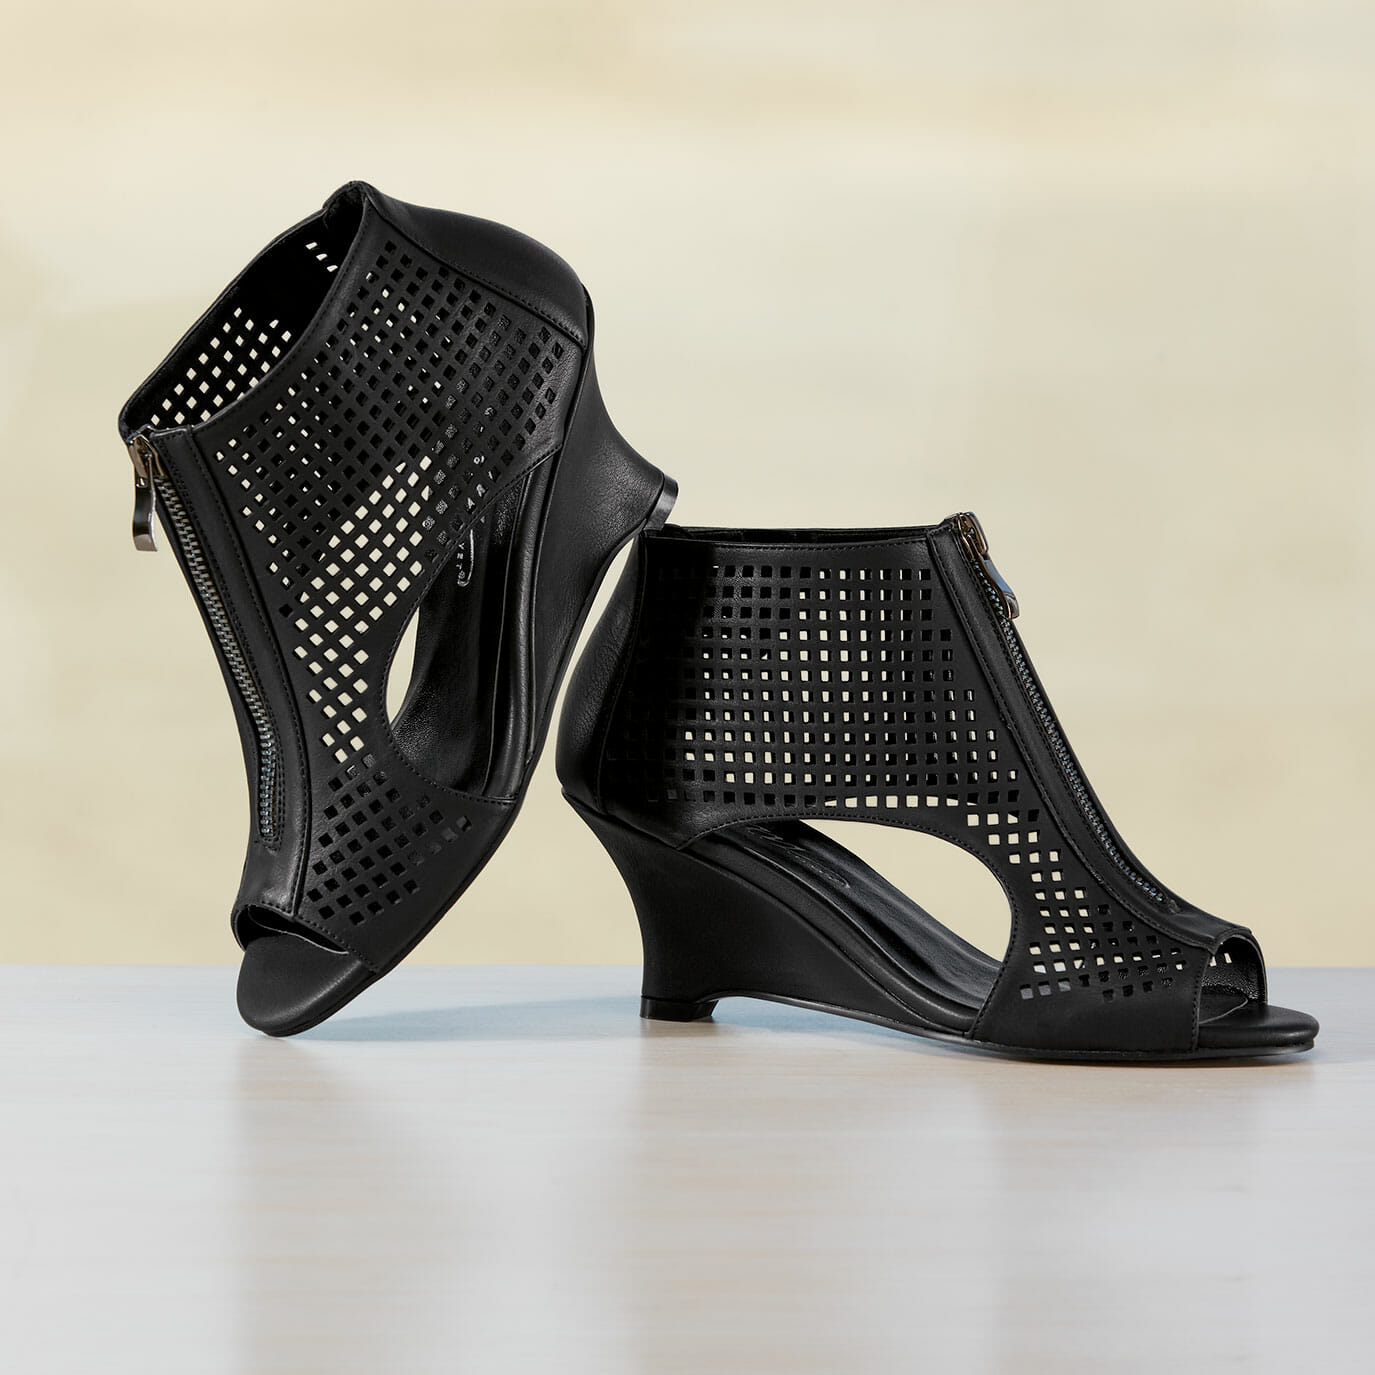 Black faux leather gladiator shoe with a wedge heel, open toe and lower sides, front zipper and pierced sides.